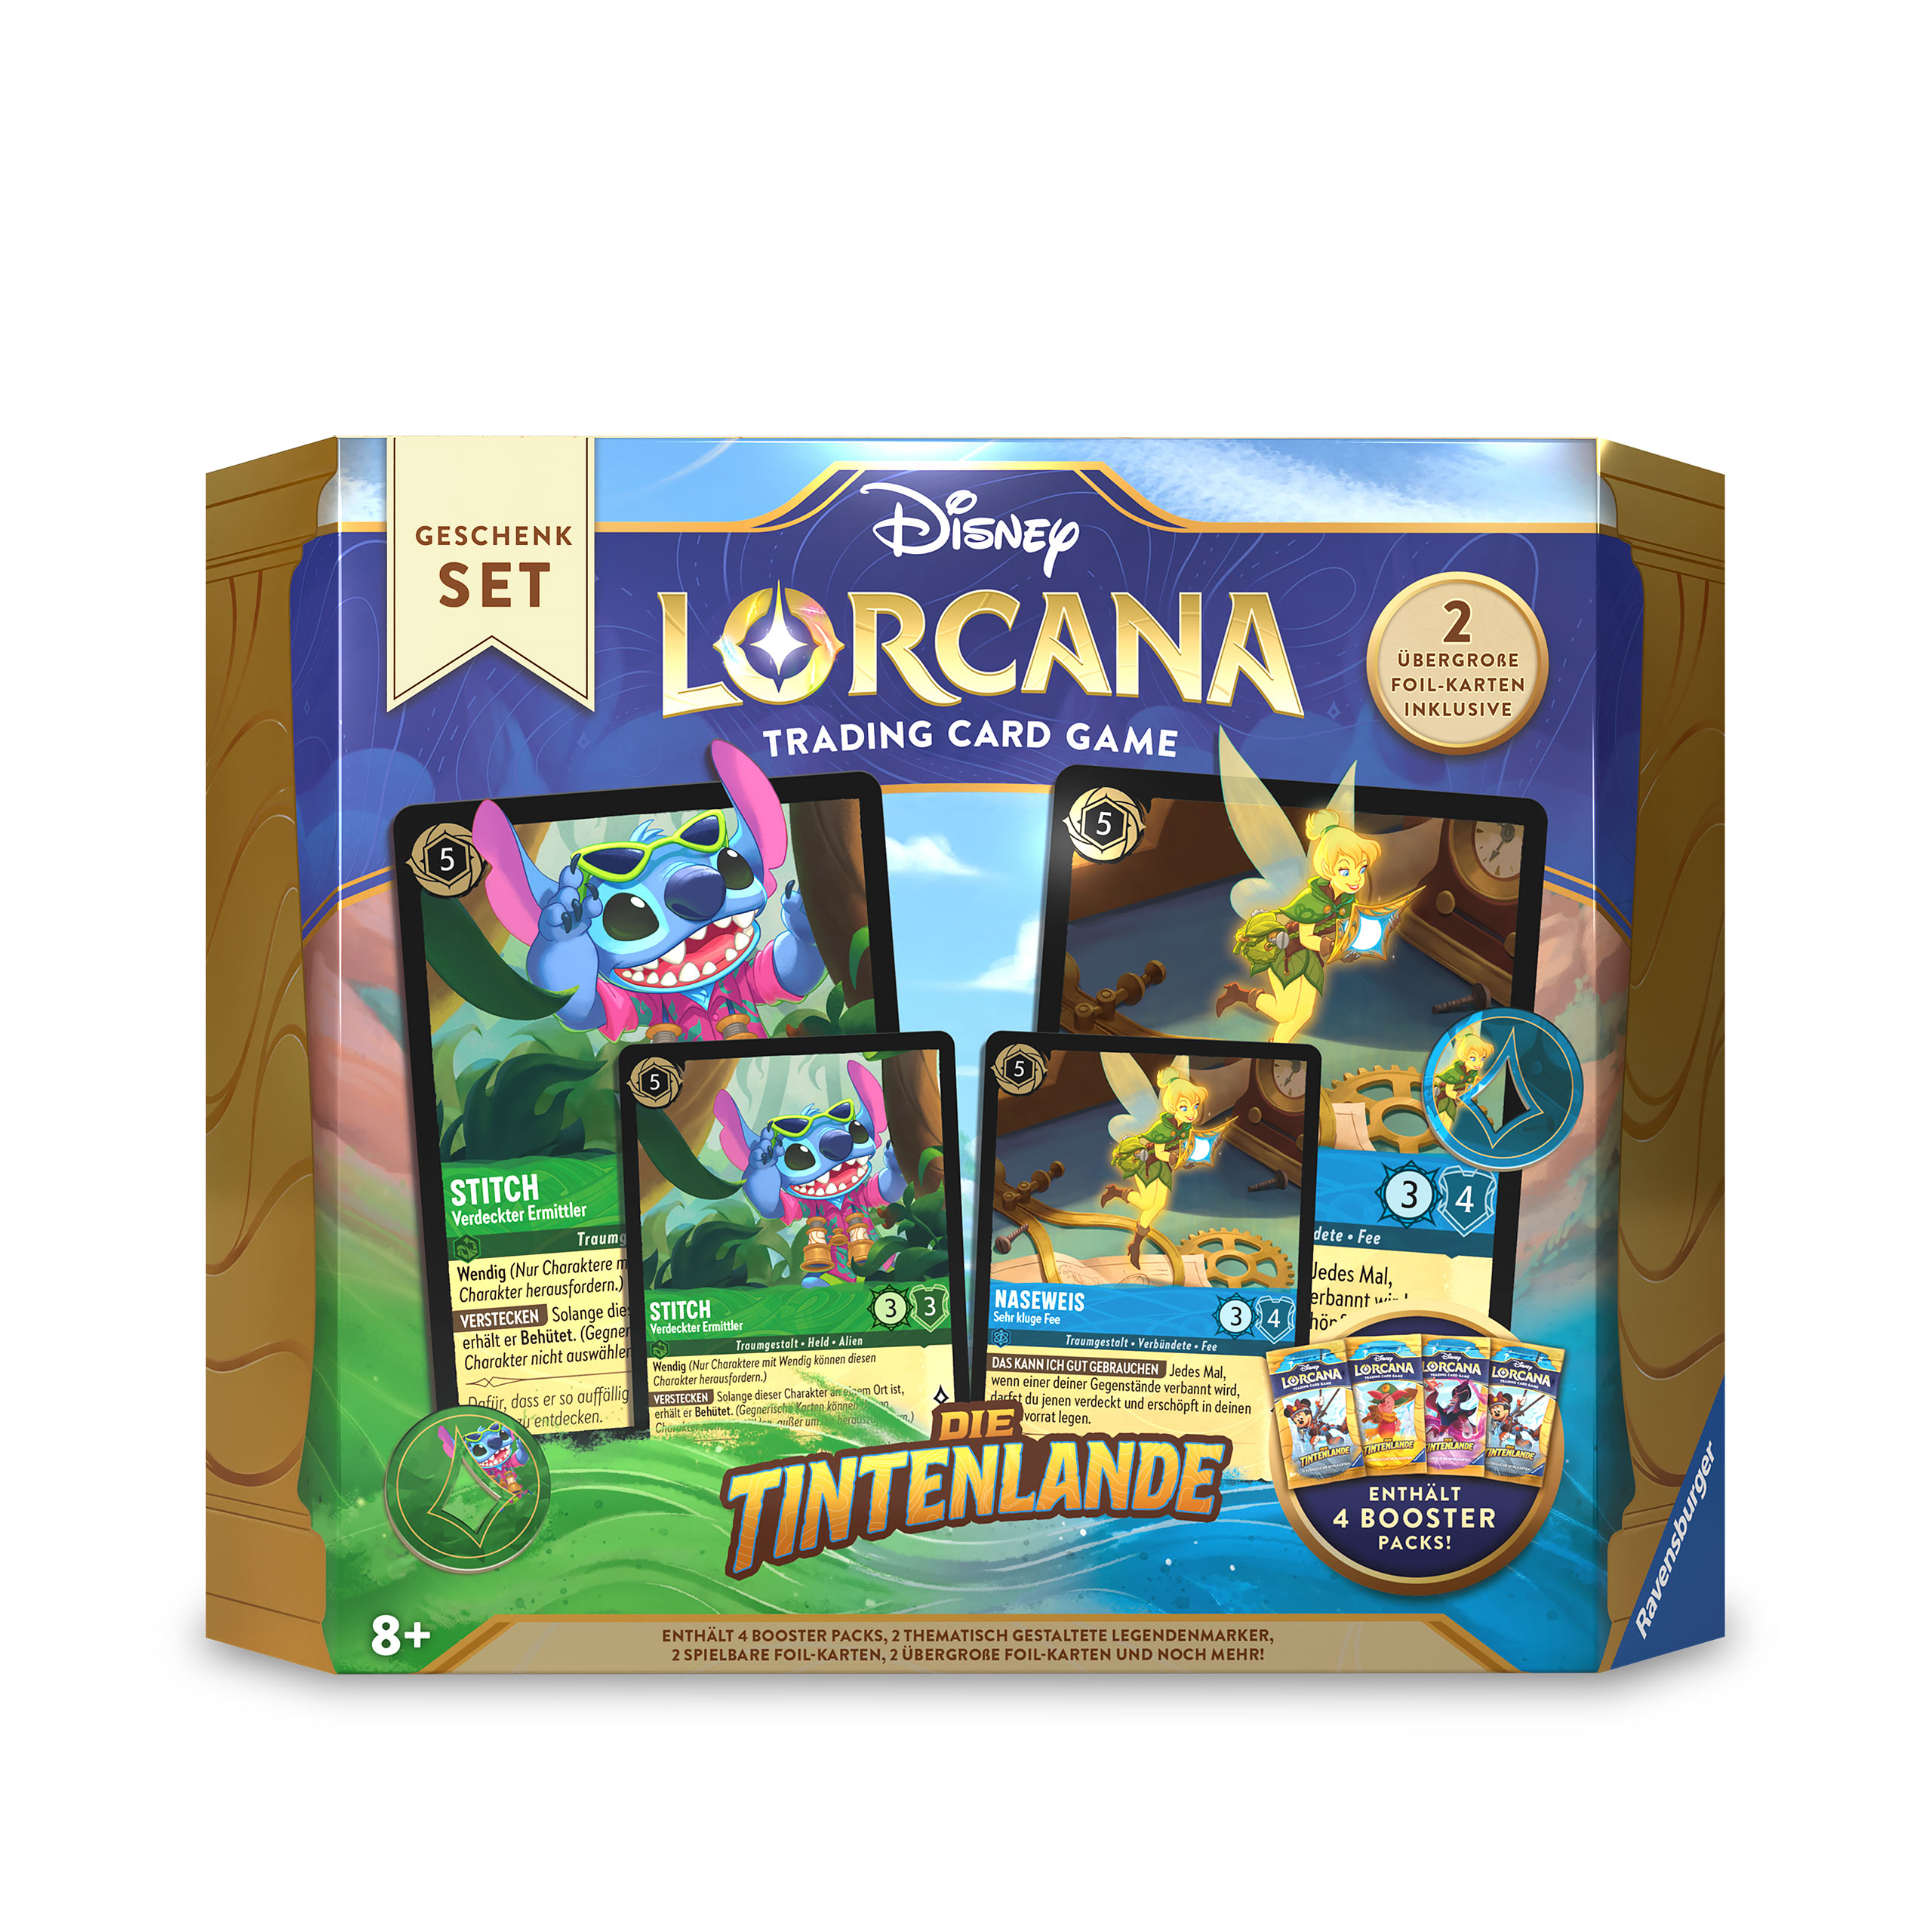 Disney Lorcana Gift Set - The Inklands Trading Card Game